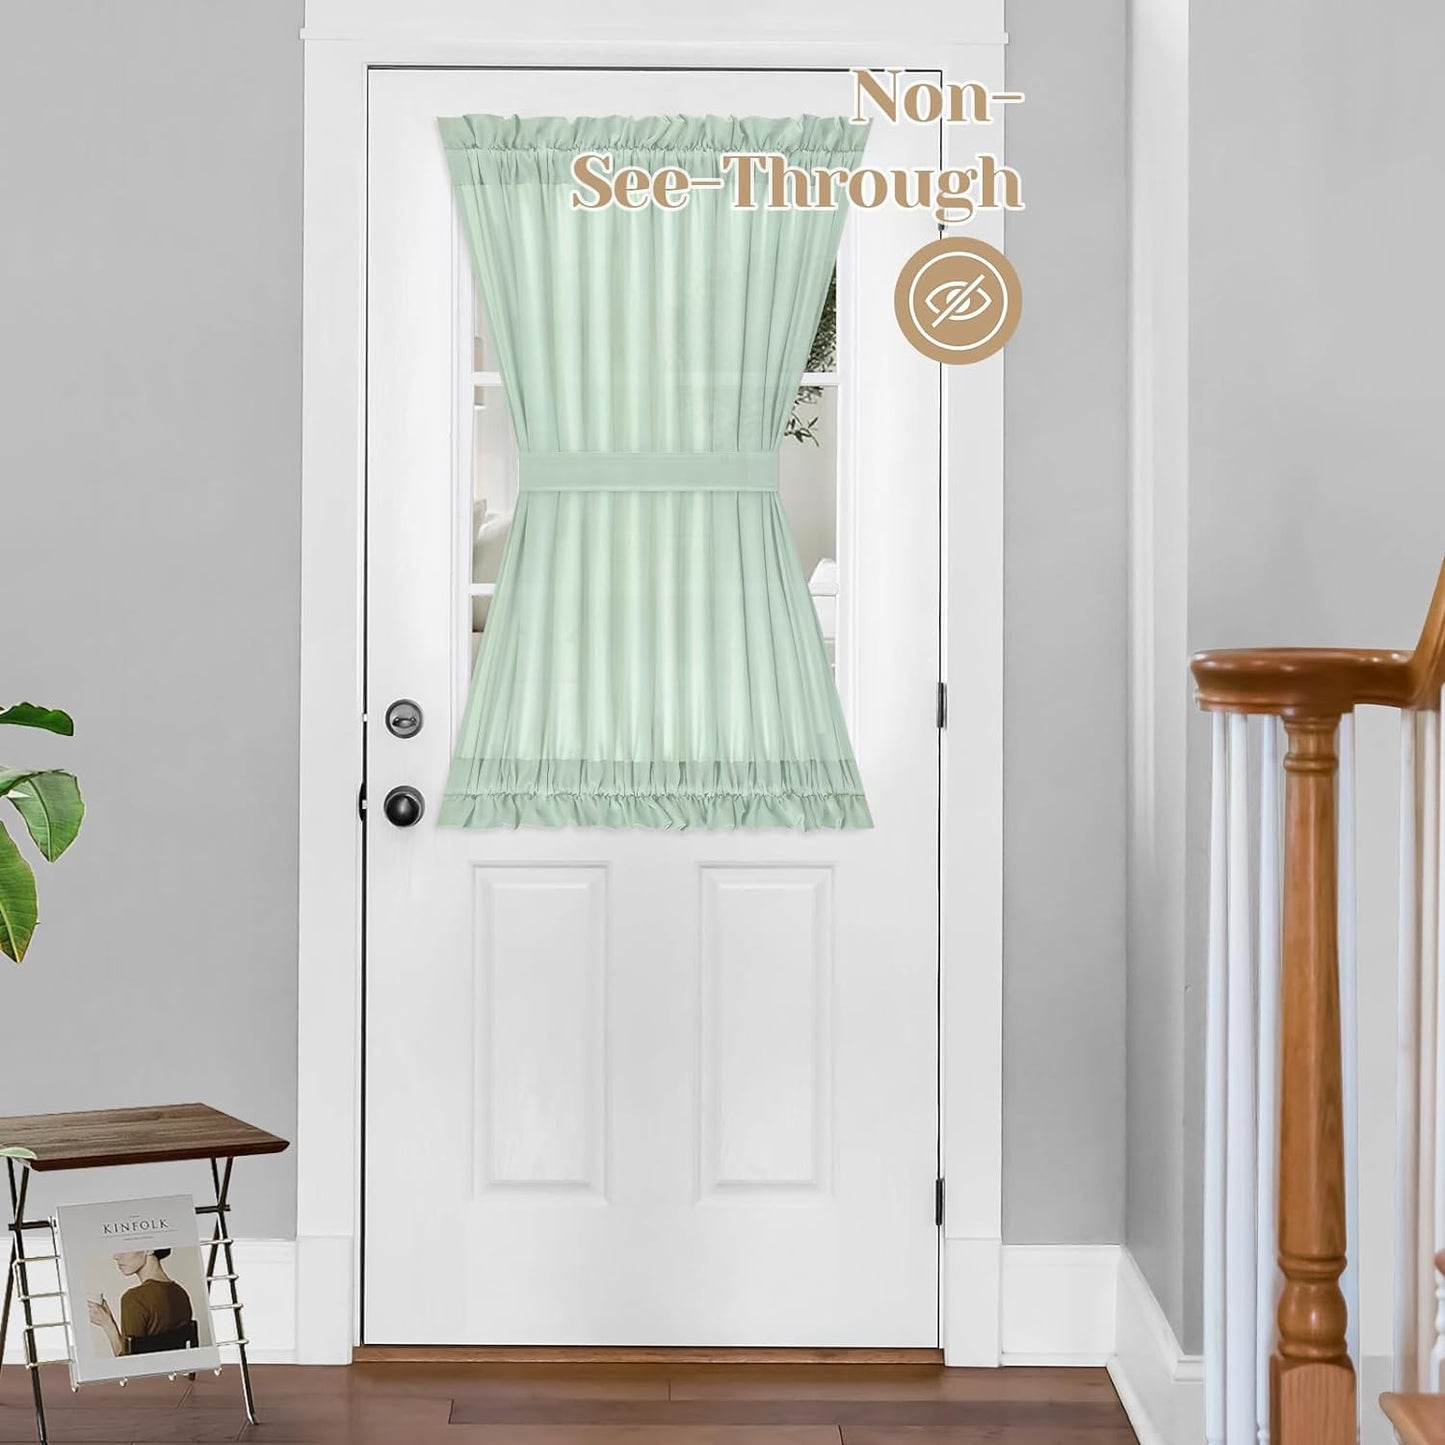 HOMEIDEAS Non-See-Through Sidelight Curtains for Front Door, Privacy Semi Sheer Door Window Curtains, Rod Pocket Light Filtering French Door Curtains with Tieback, (1 Panel, White, 26W X 72L)  HOMEIDEAS Sage Green 1 Panel-54 X 40 